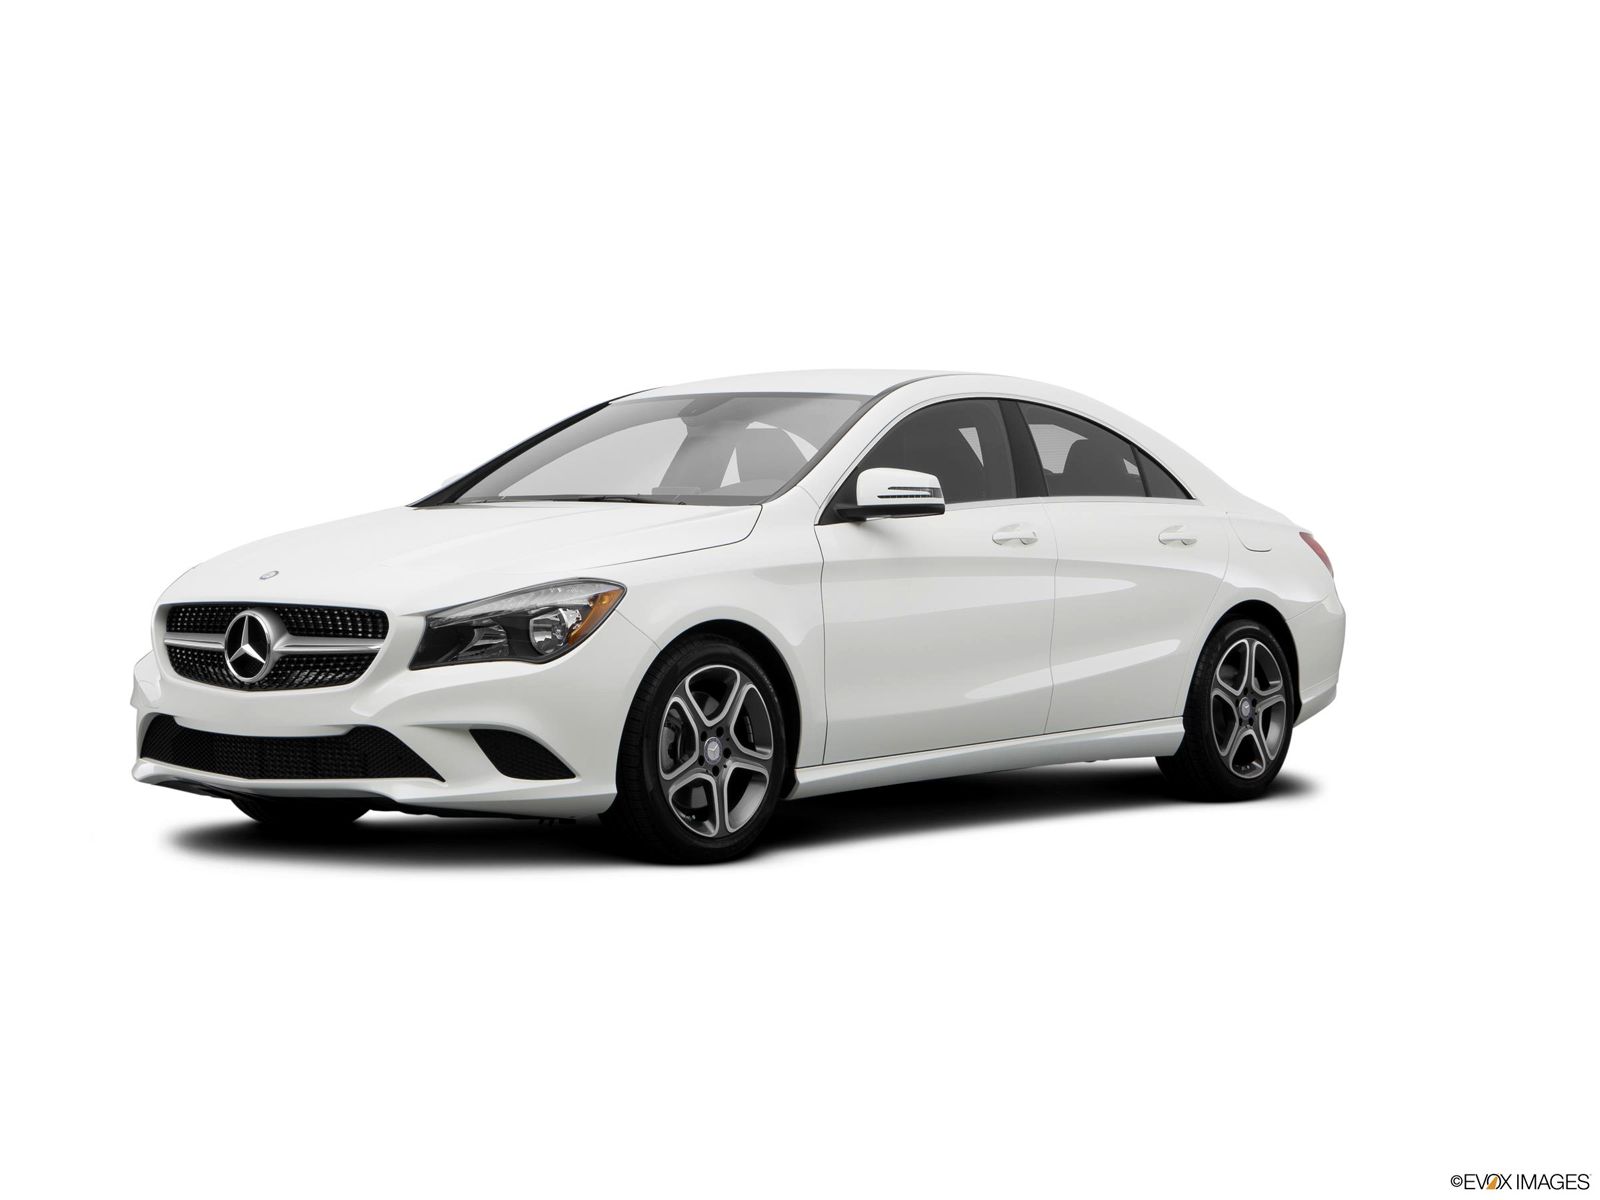 2014 Mercedes-Benz CLA250 Research, Photos, Specs and Expertise | CarMax